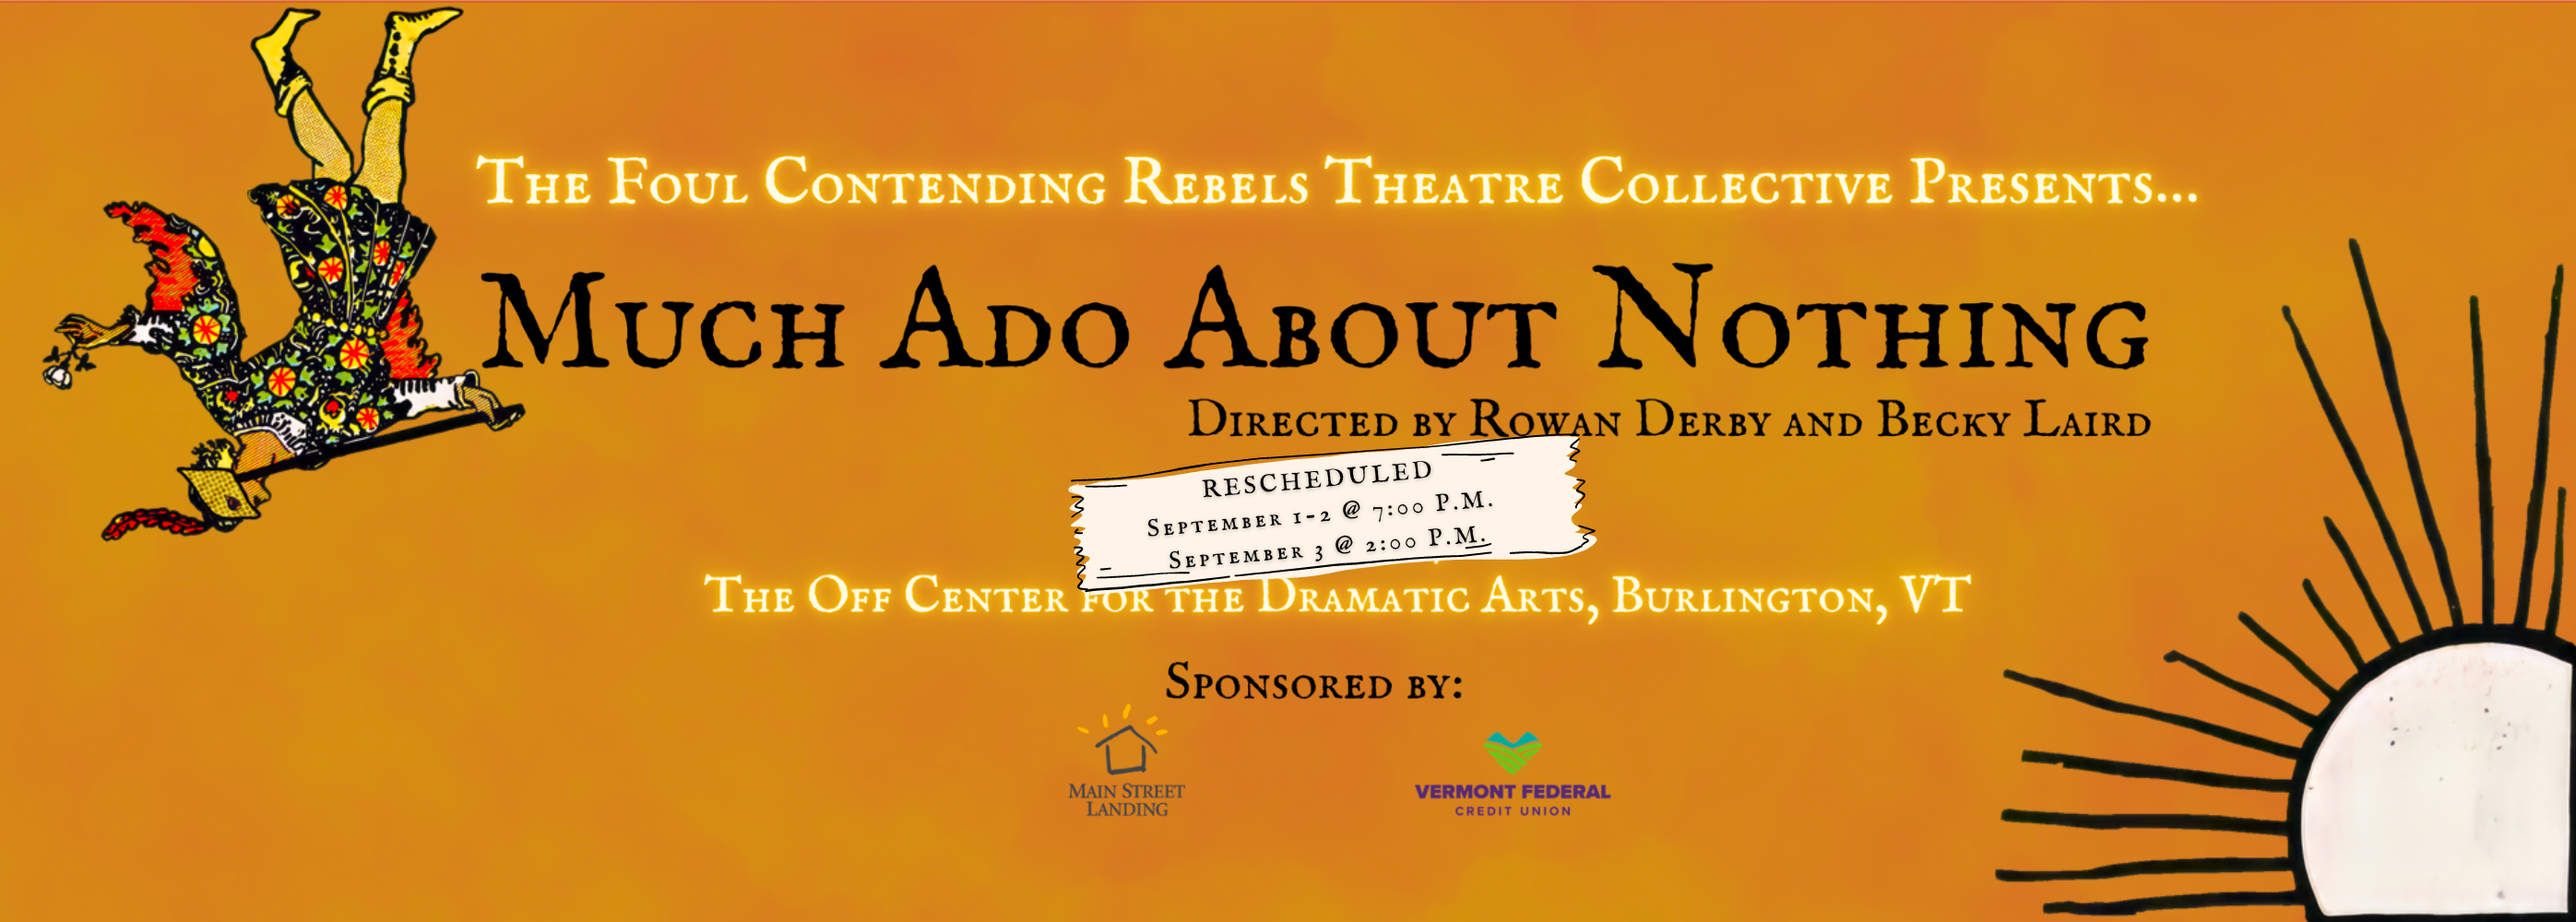 Much Ado About Nothing Poster - Graphis